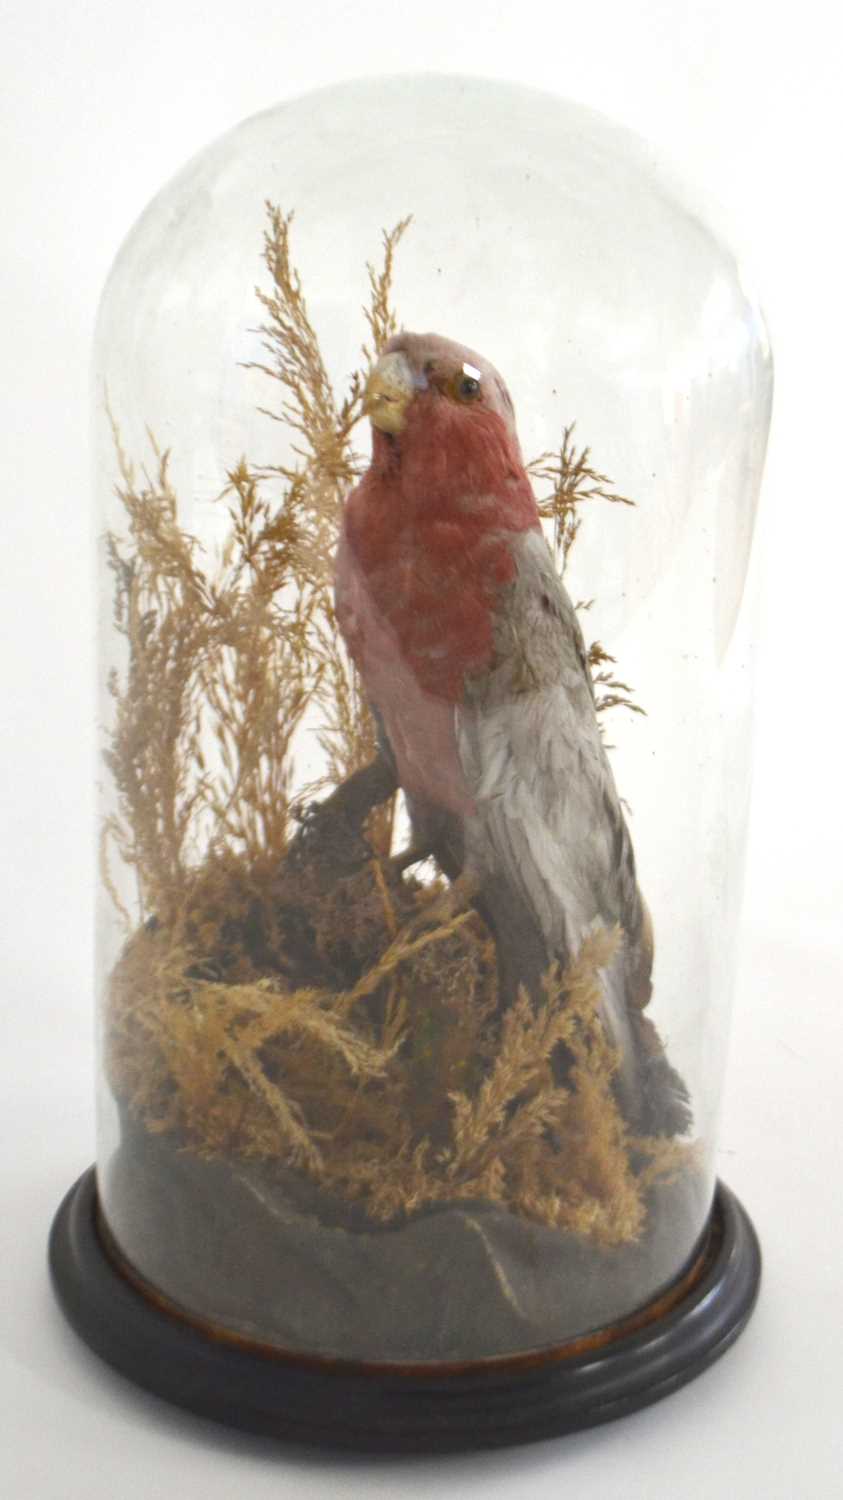 Early 20th Century taxidermy Galah (Eolophus Roseicapilla) pink and grey Cockatoo under glass dome